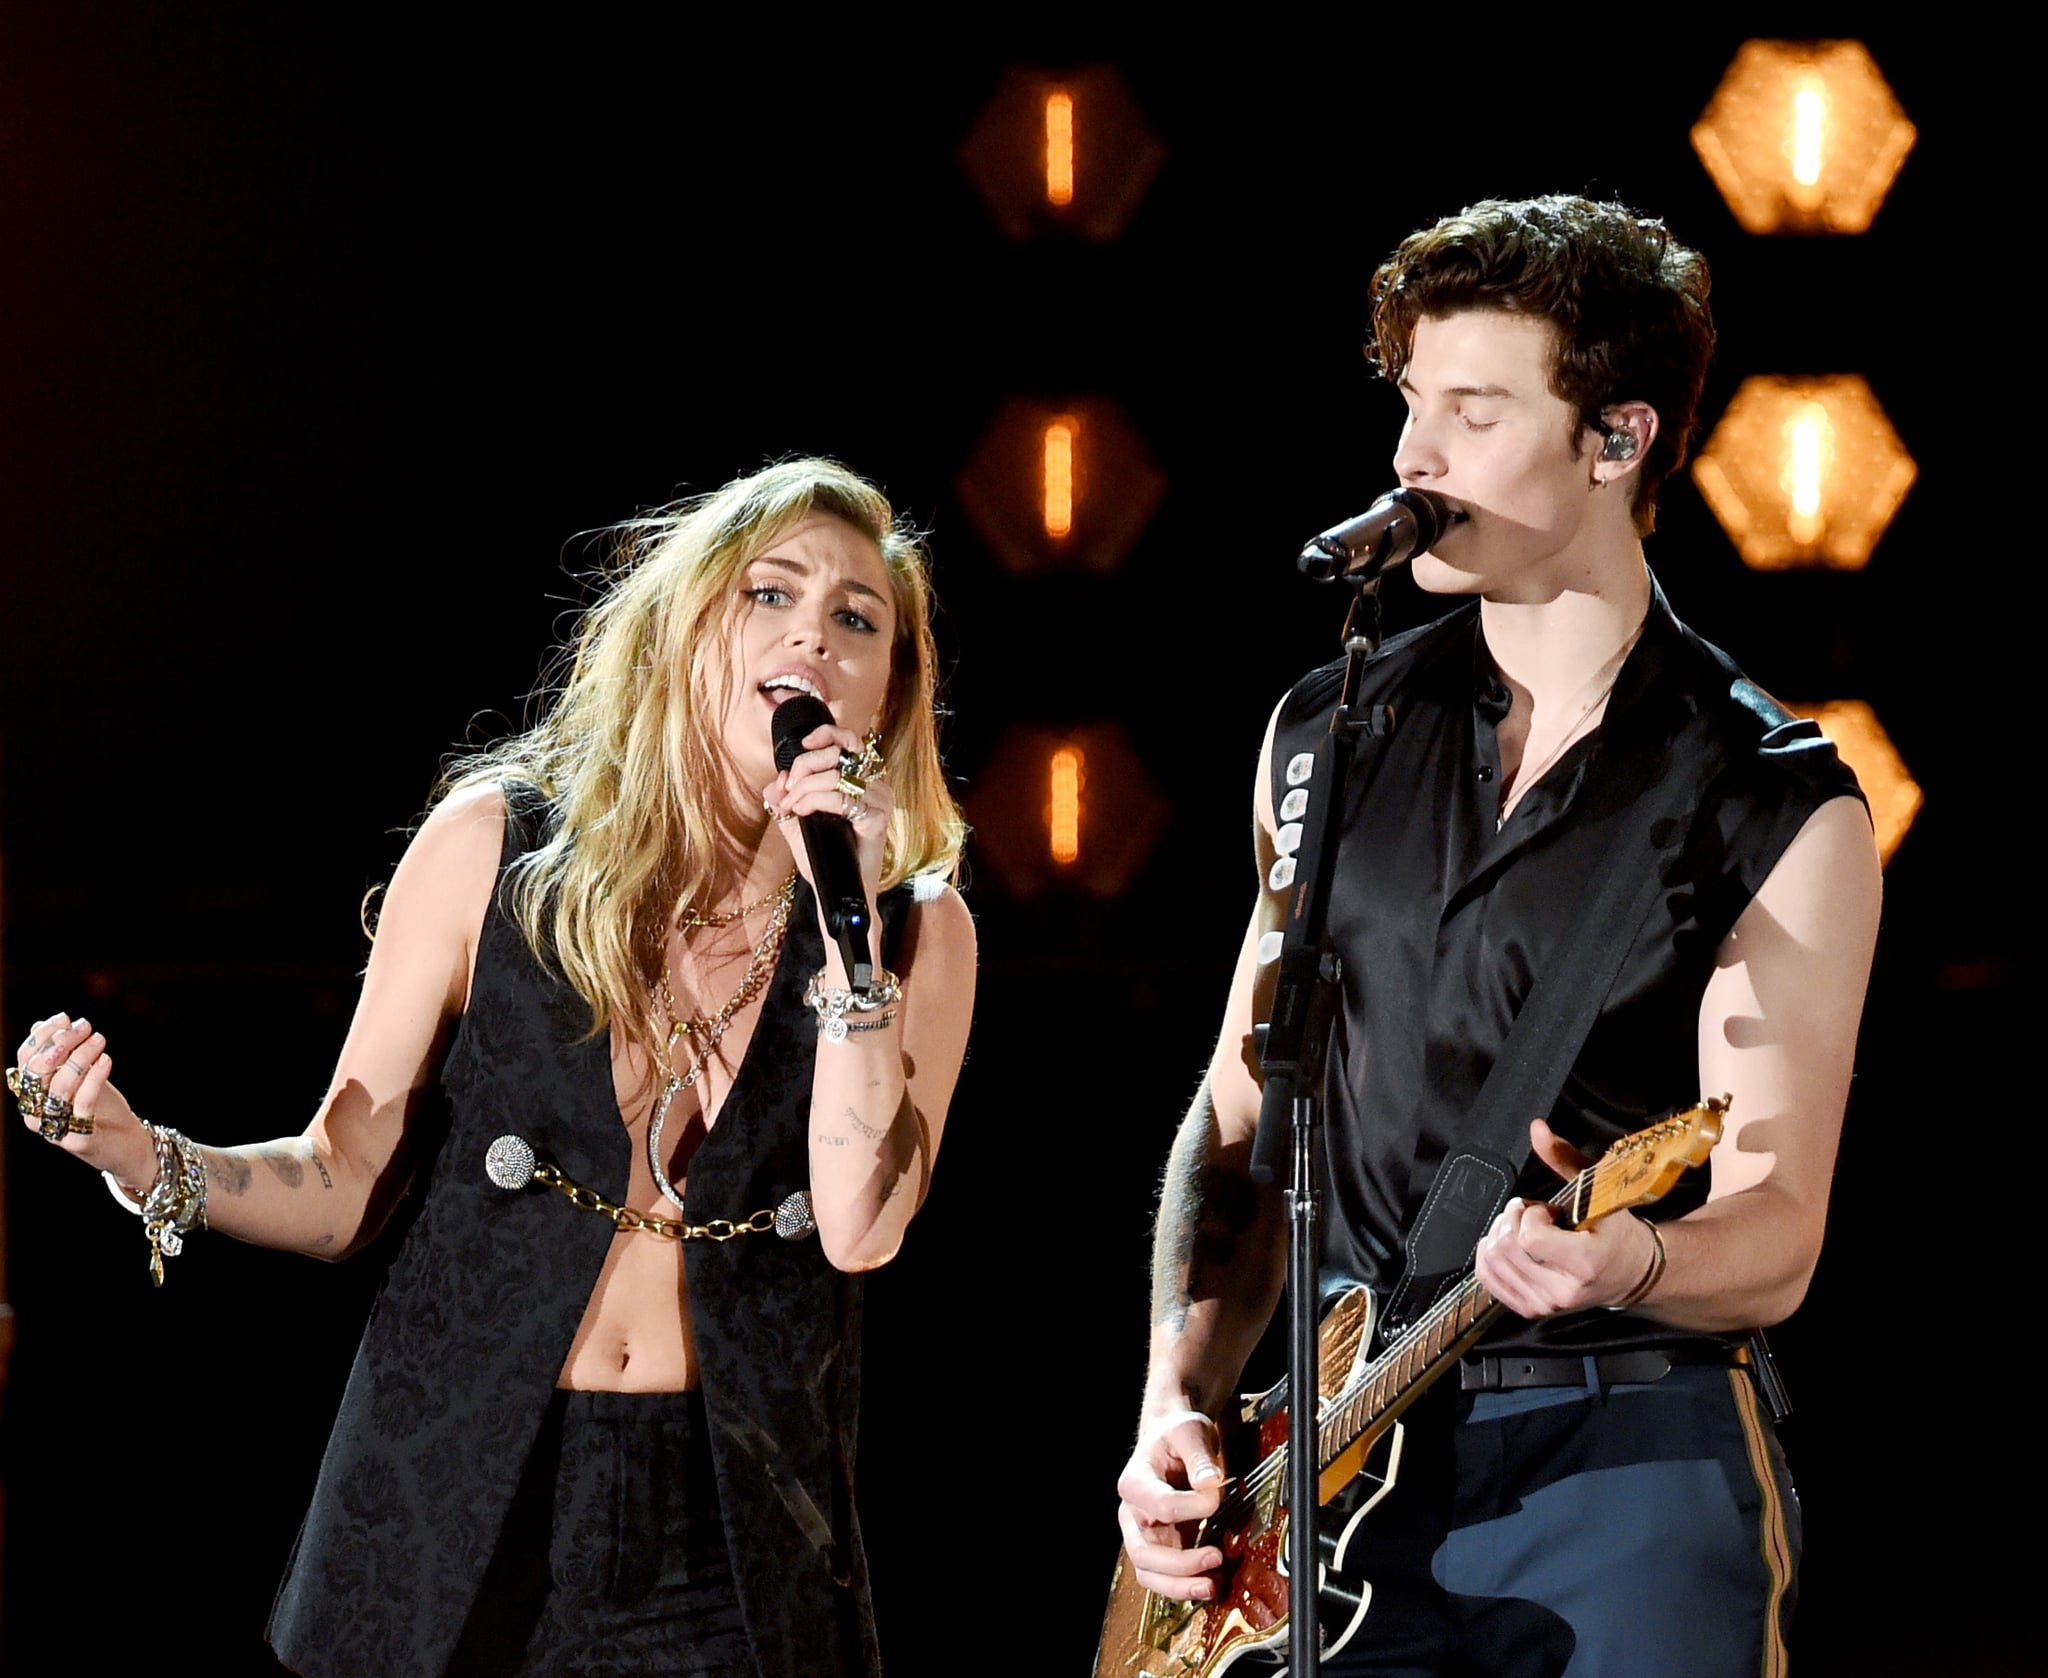 In 2019, Miley Cyrus and Shawn Mendes performed together at the Grammys.